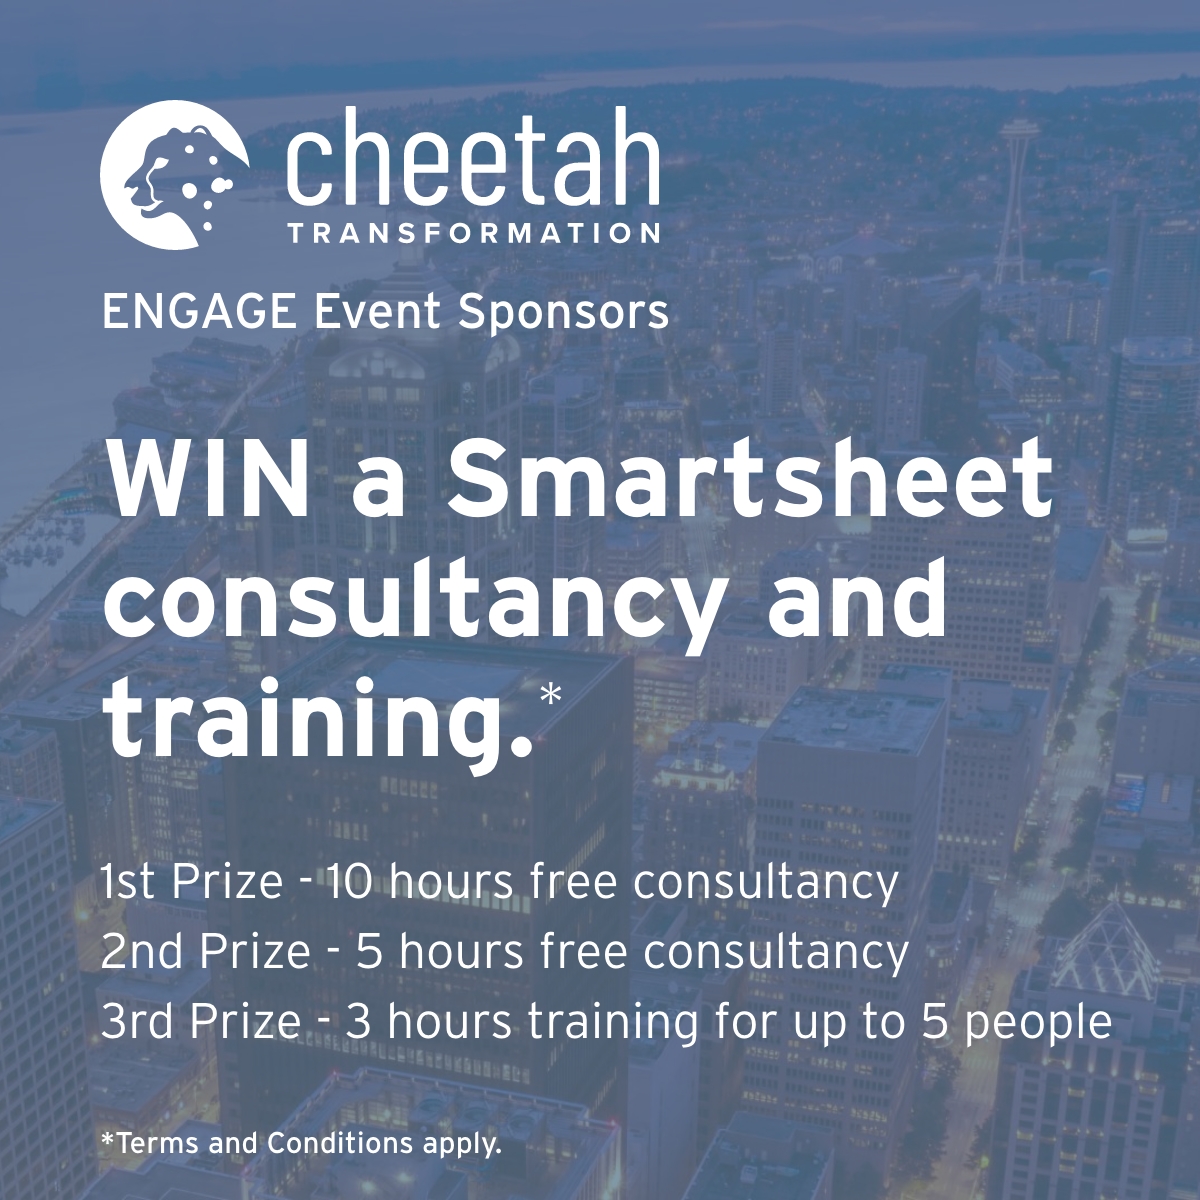 Don't miss out on our #SmartsheetENGAGE GIVEAWAY!

Follow us on LinkedIn for a chance to WIN
5 - 10 hrs free consultancy
or 3 hrs training for up to 5 people

Giveaway closes at midnight PT tonight. T&Cs apply.
Enter ➡️ linkedin.com/company/cheeta…